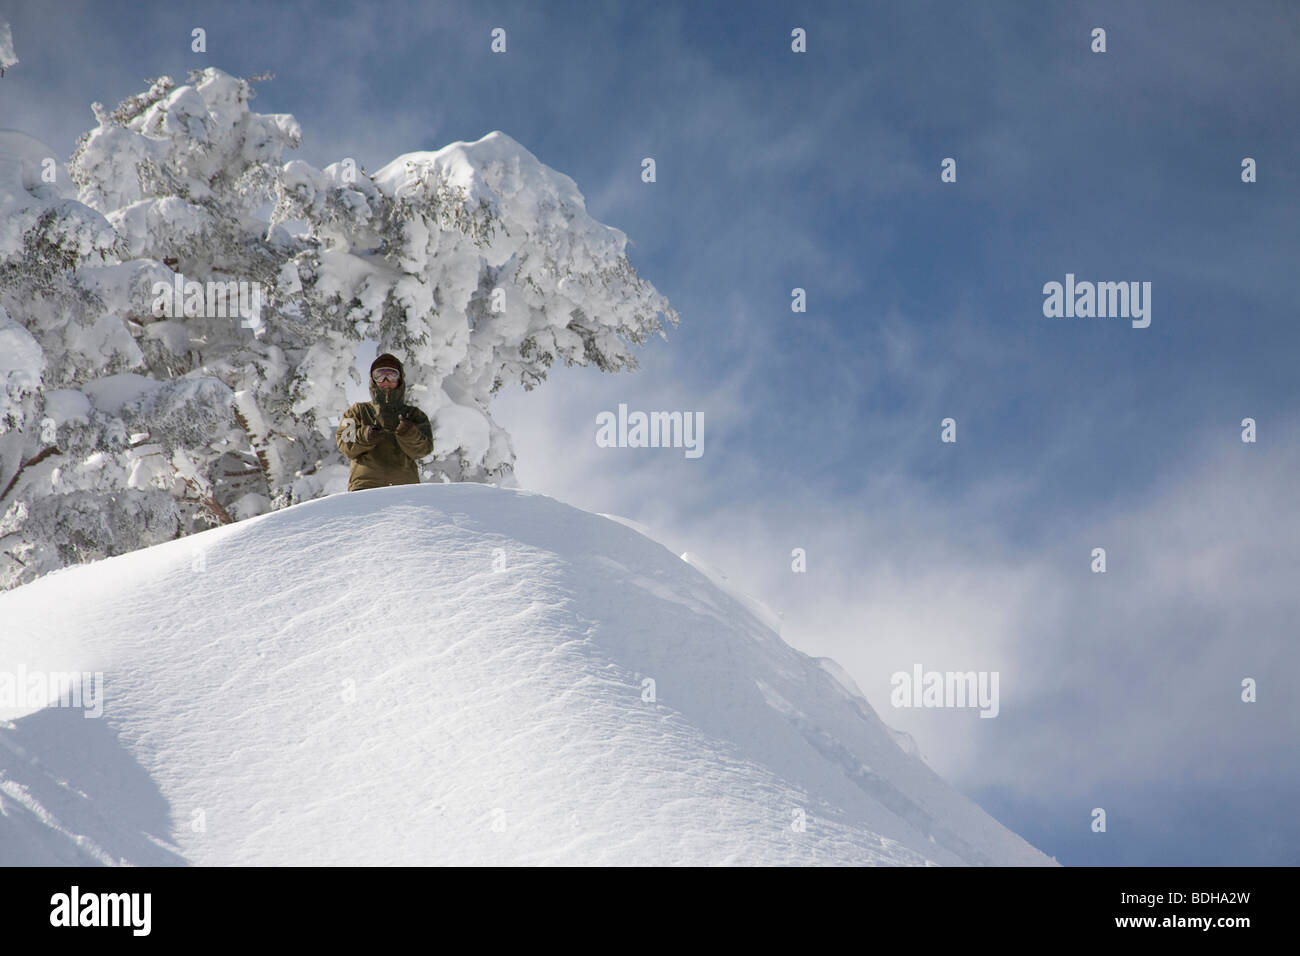 A skier looking over a snowbank with a blue sky in the background. Stock Photo